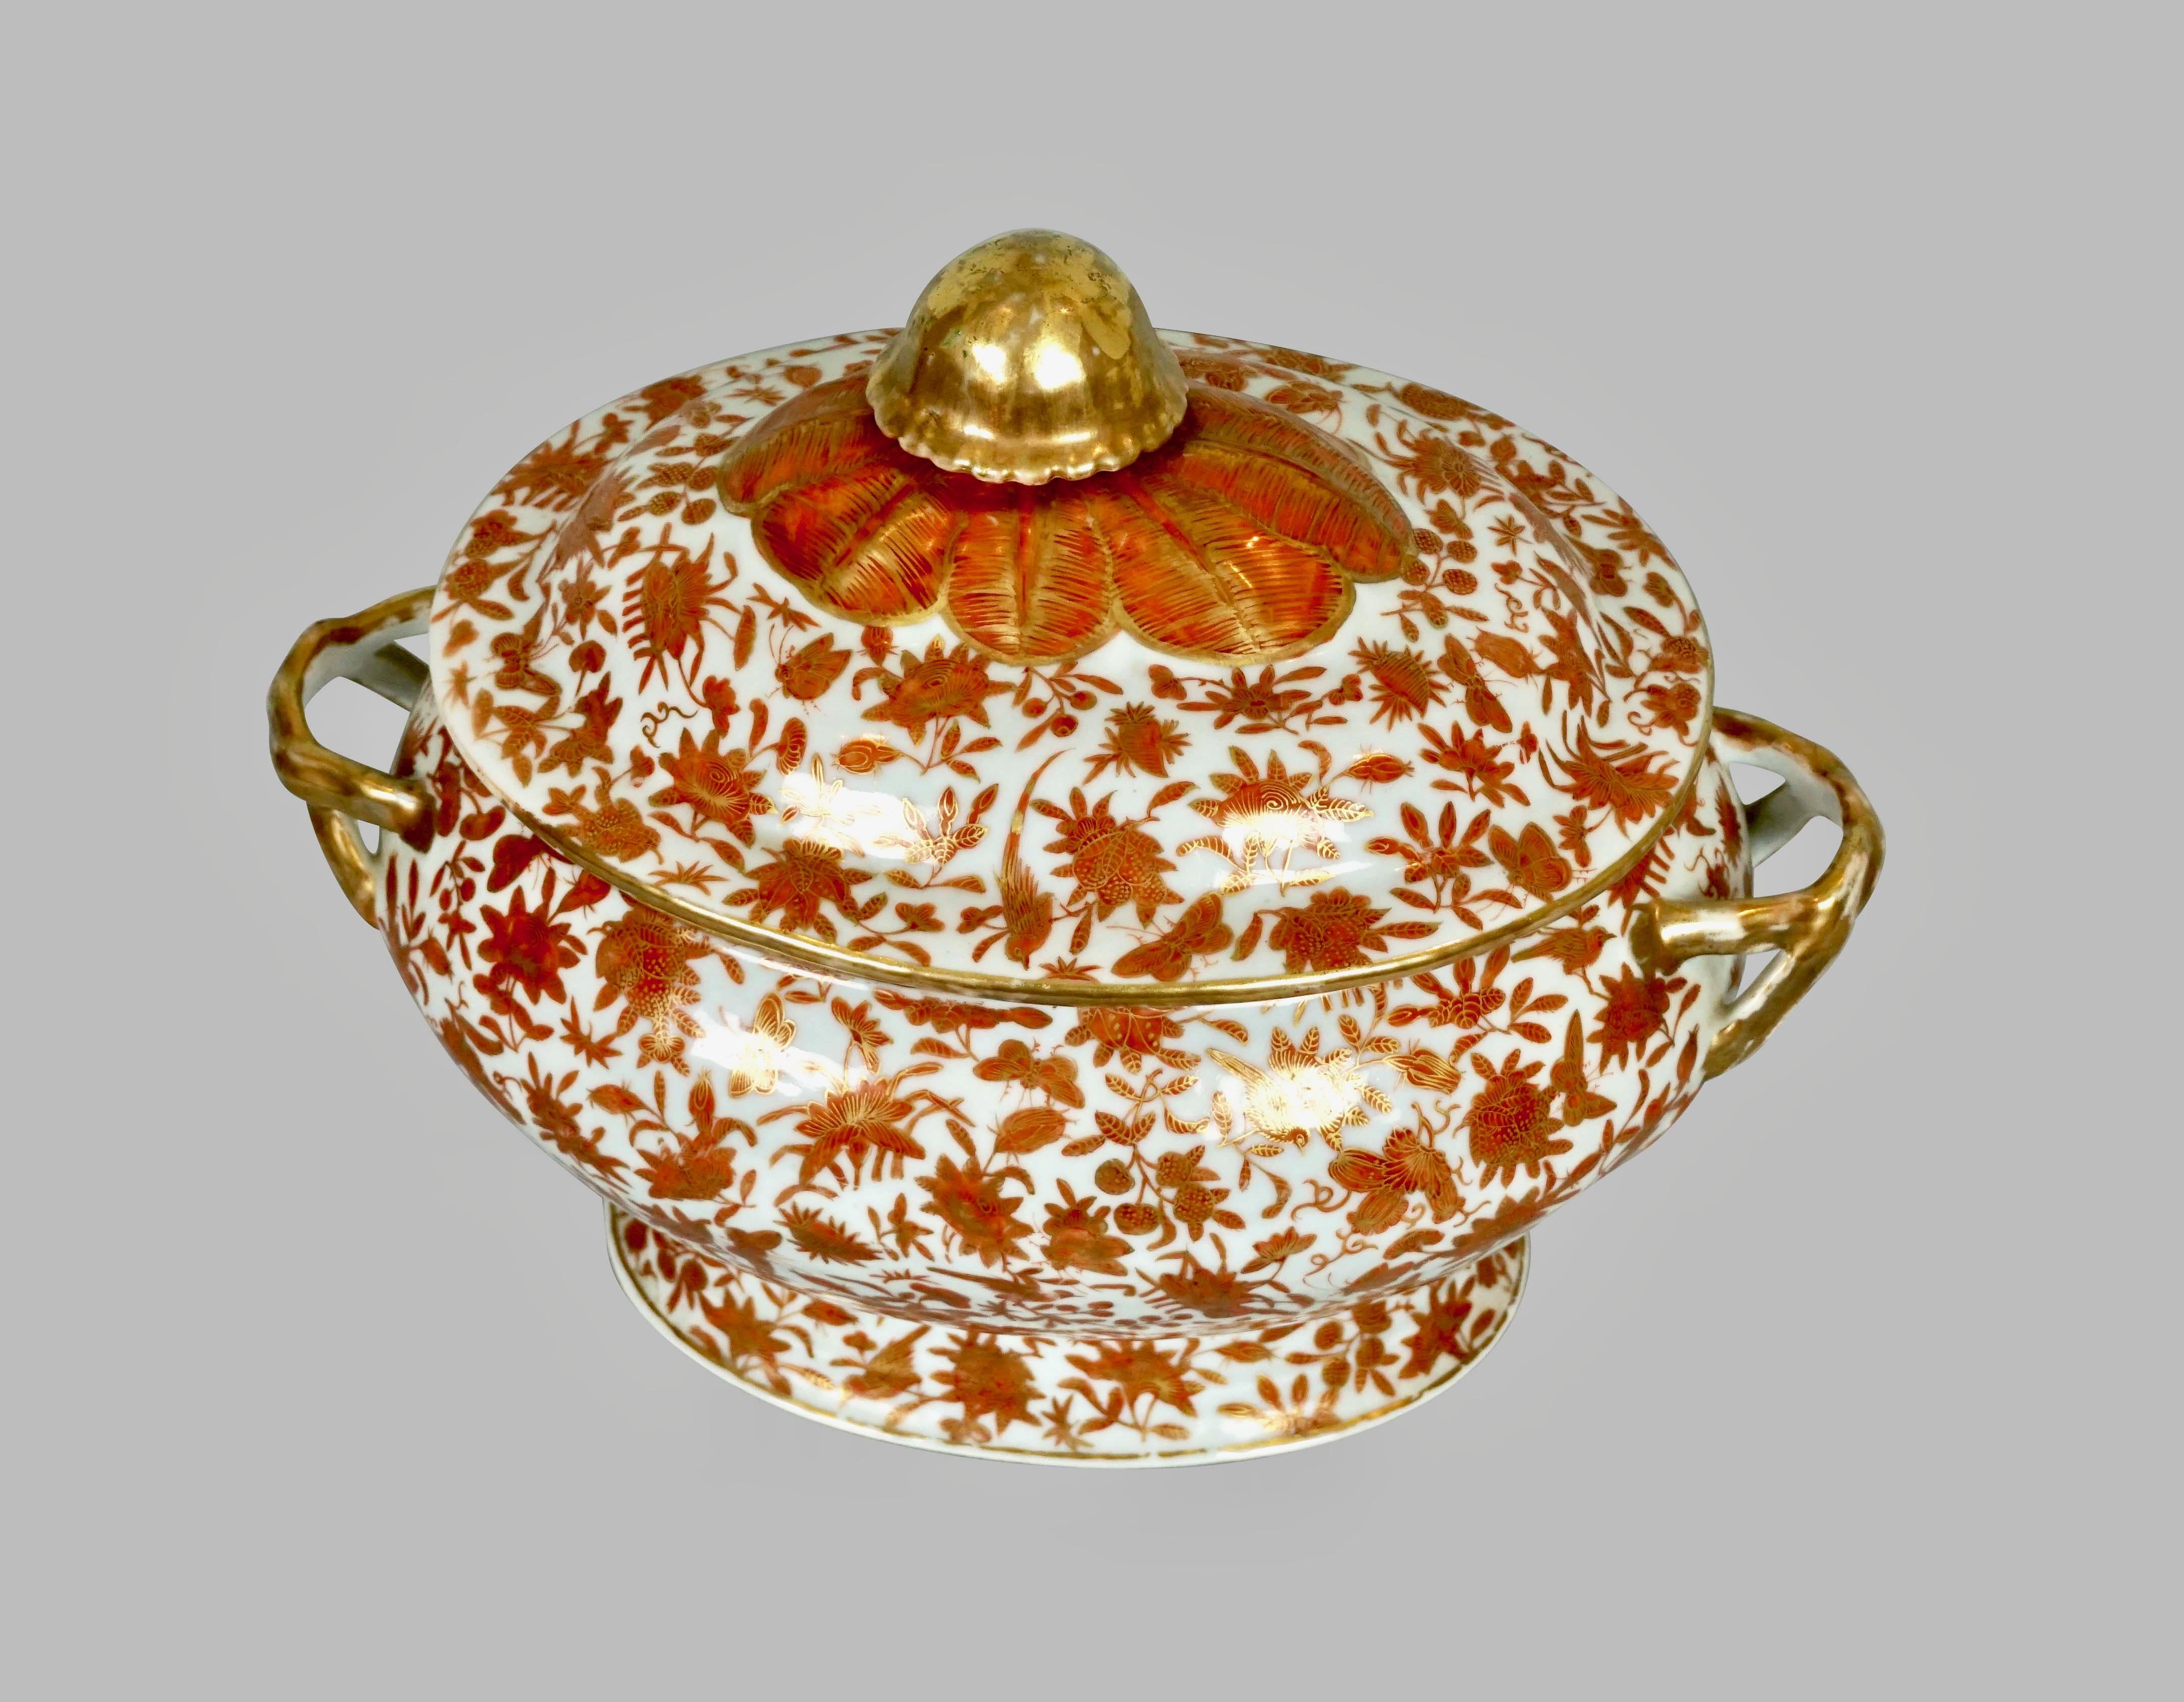 This Chinese export sacred bird and butterfly pattern soup tureen is decorated overall in a traditional palette of orange and gold. The pattern first appeared around 1800 and incorporates long established Chinese motifs of birds, butterflies and